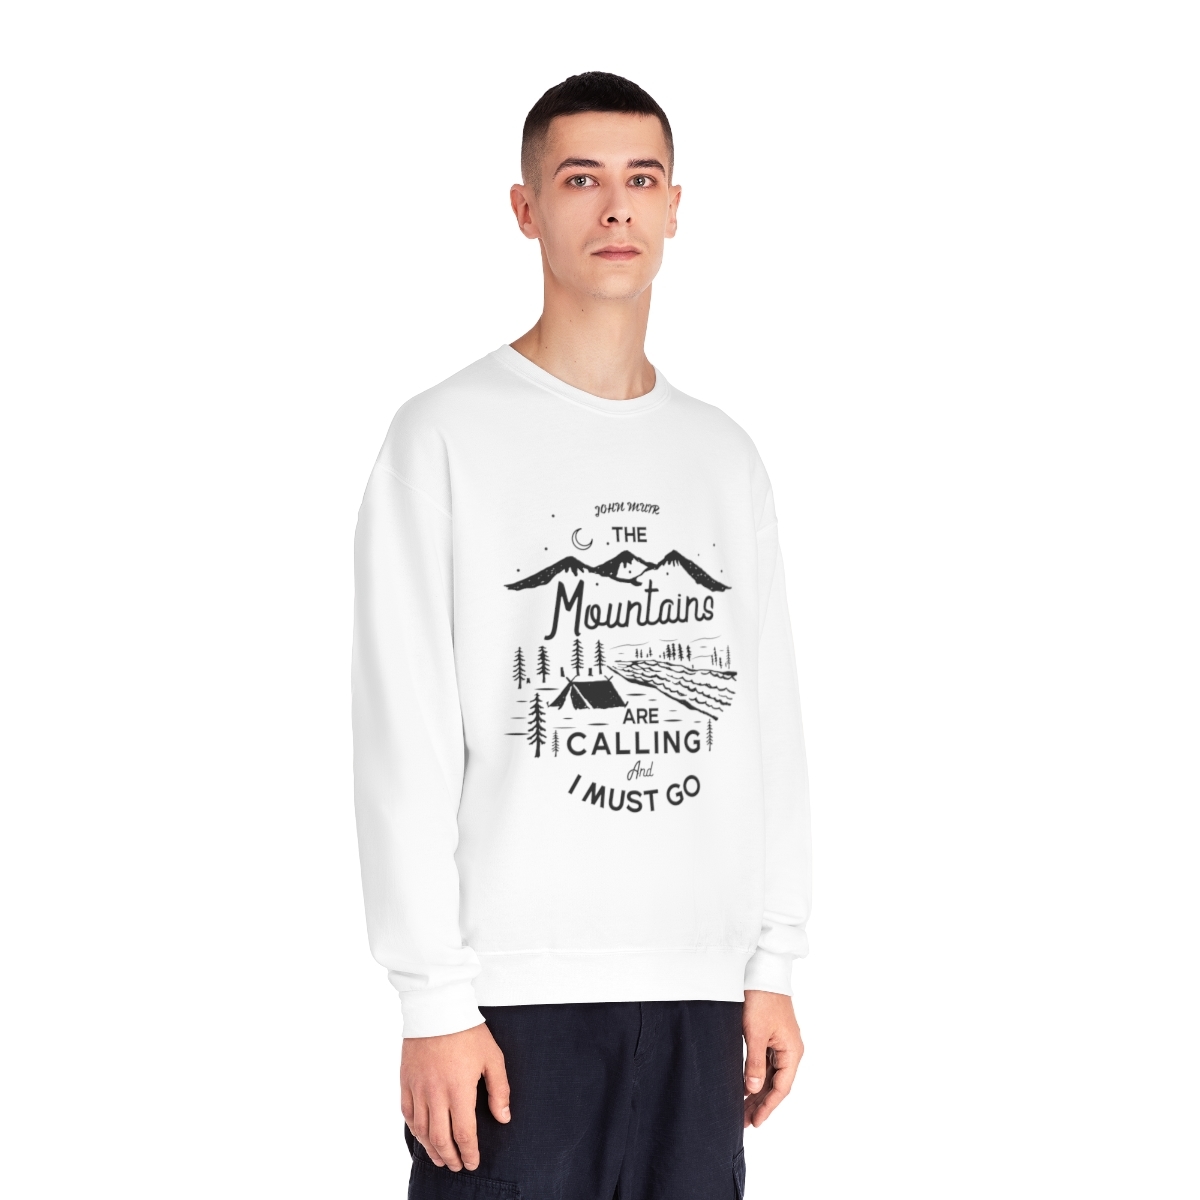 Primary image for Unisex NuBlend® "The Mountains are Calling" Sweatshirt - Black